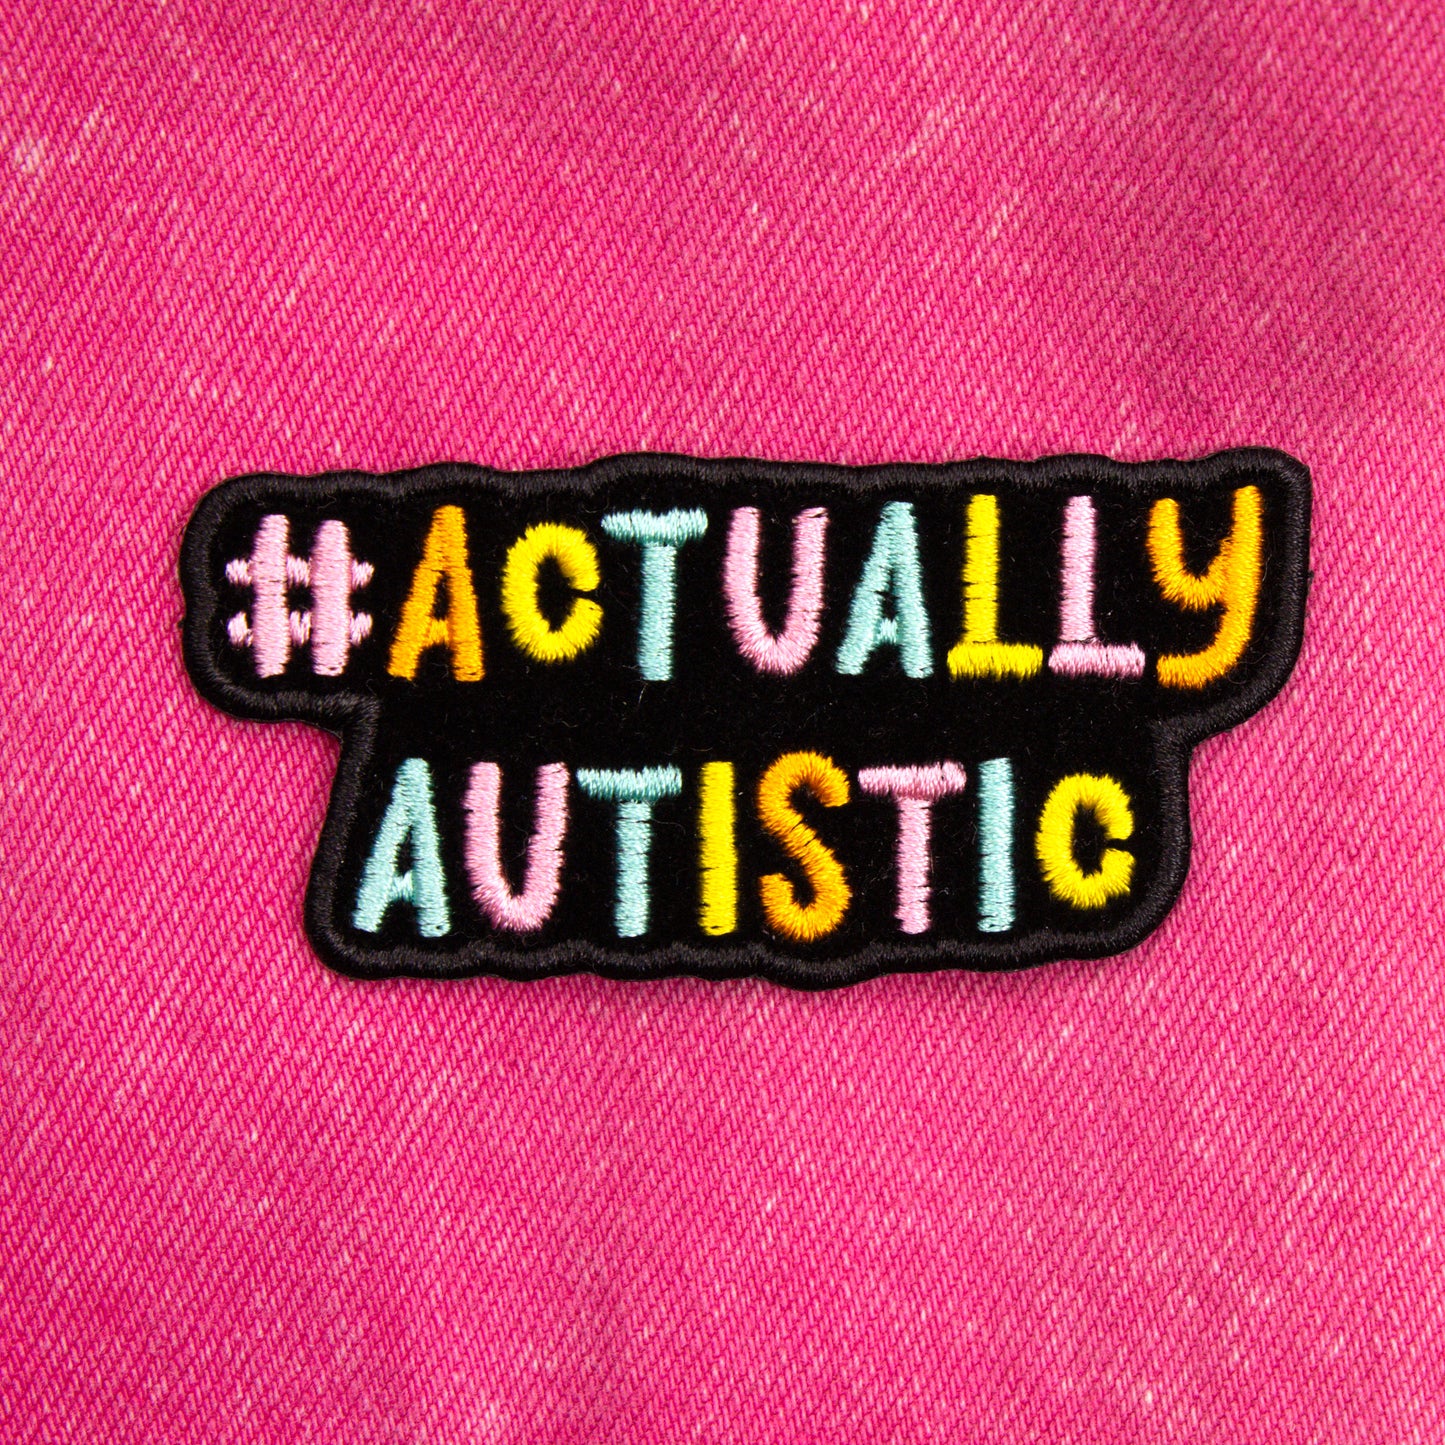 Actually autistic neurodivergent embroidered  iron-on patch